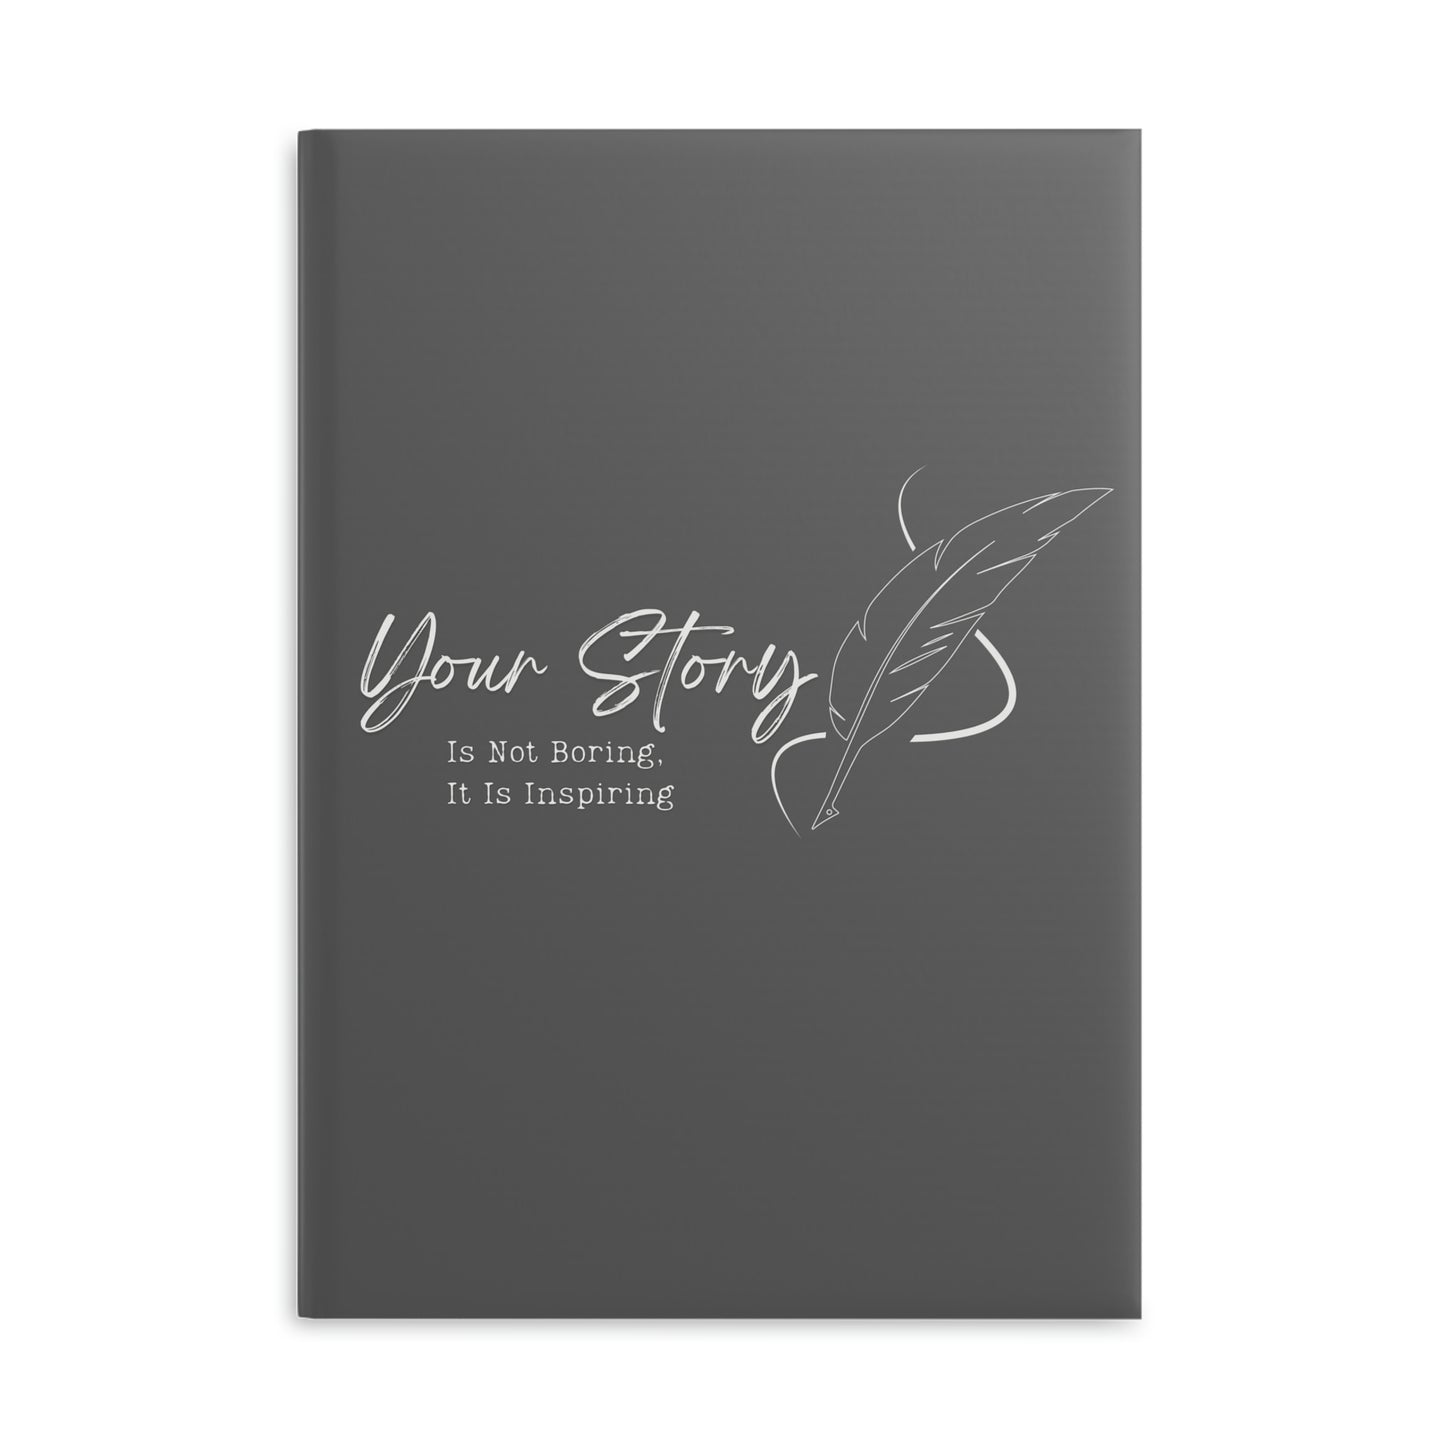 Your story is not boring // Write Out Loud // Hardcover Notebook with Puffy Covers (Gray)